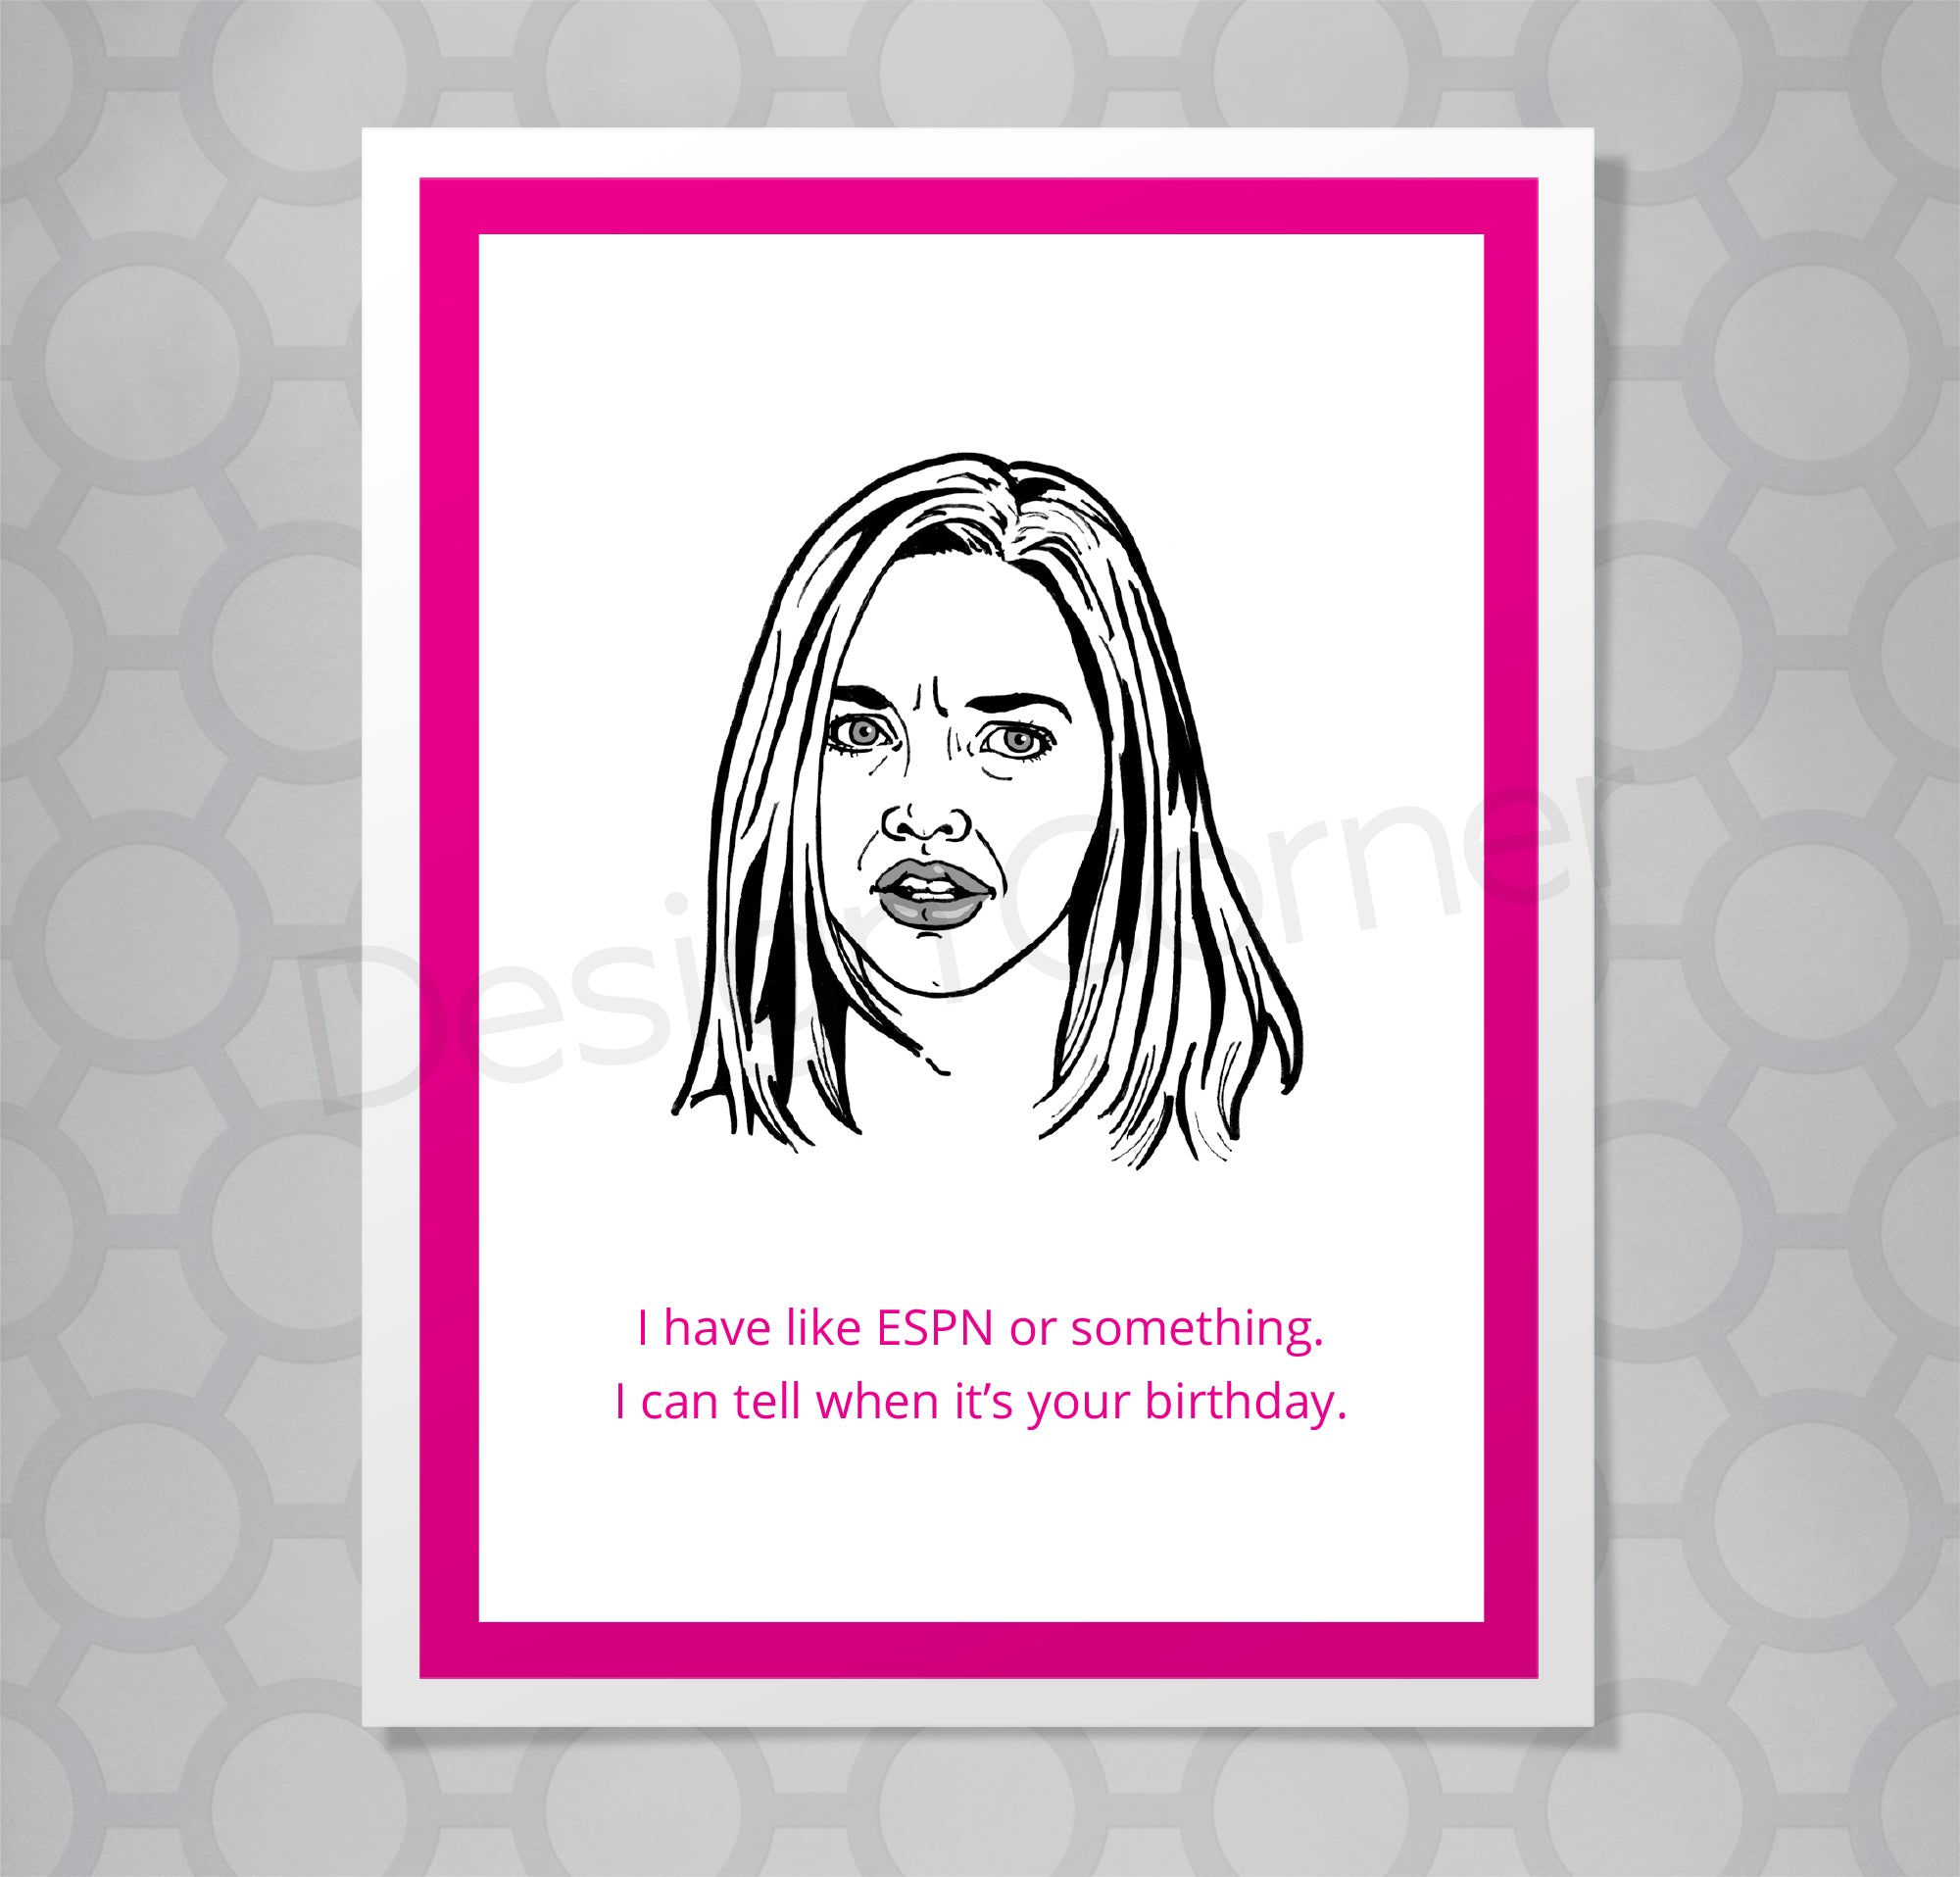 Illustration of Mean Girls Karen on greeting card with caption "I have like ESPN or something. I can tell when it's your birthday."